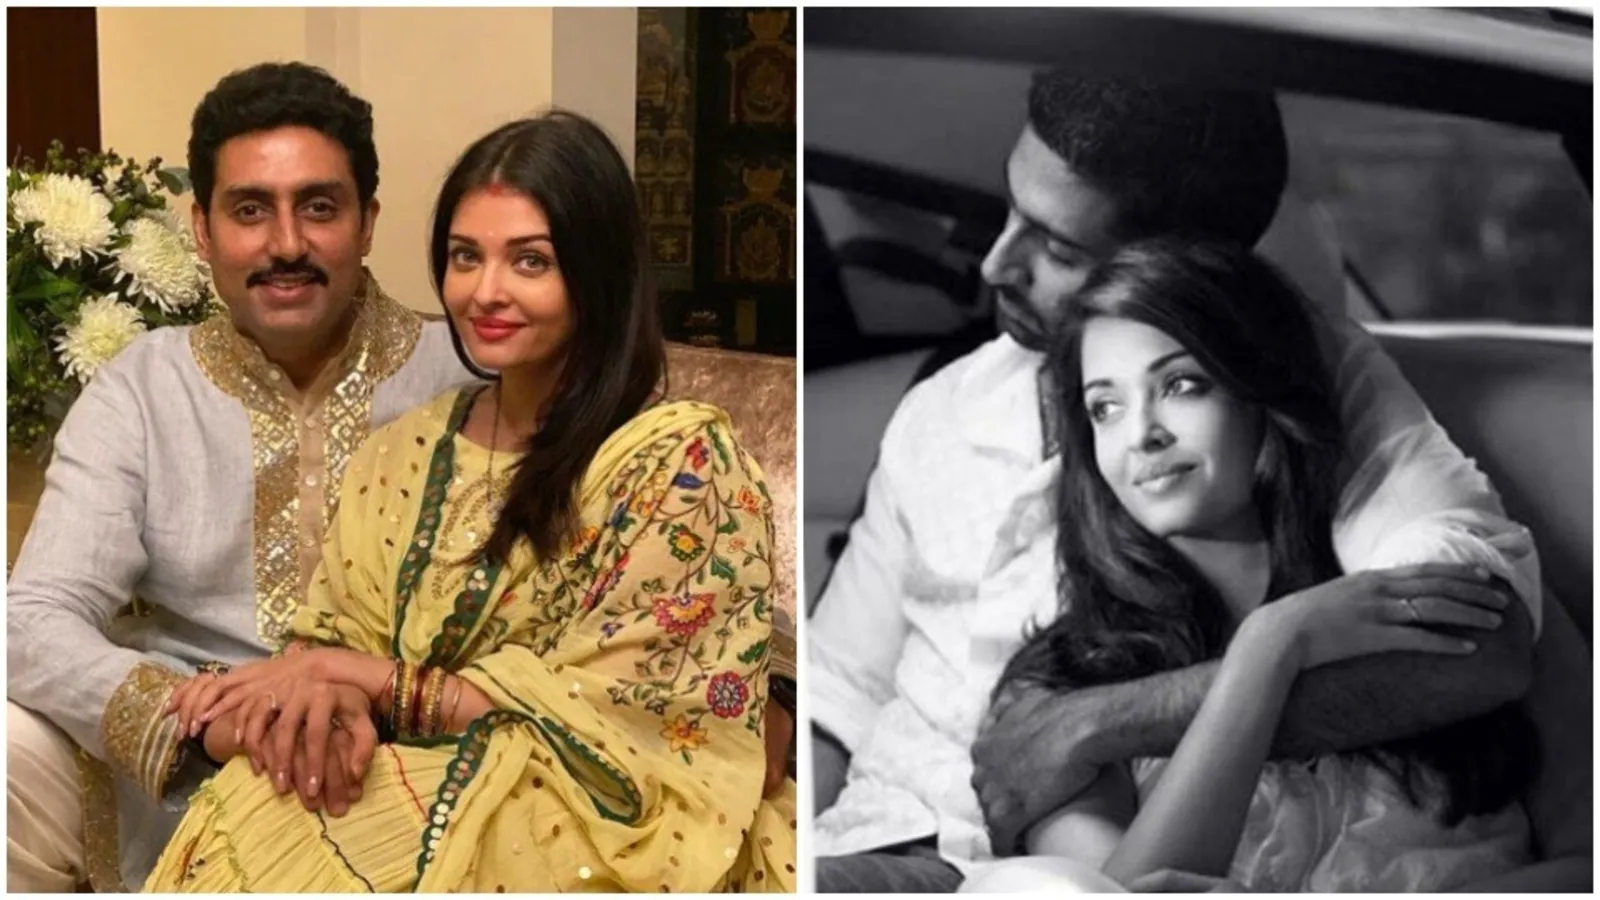 Abhishek Bachchan says family is ‘lucky’ to have Aishwarya Rai, praises her grace in ‘difficult times’